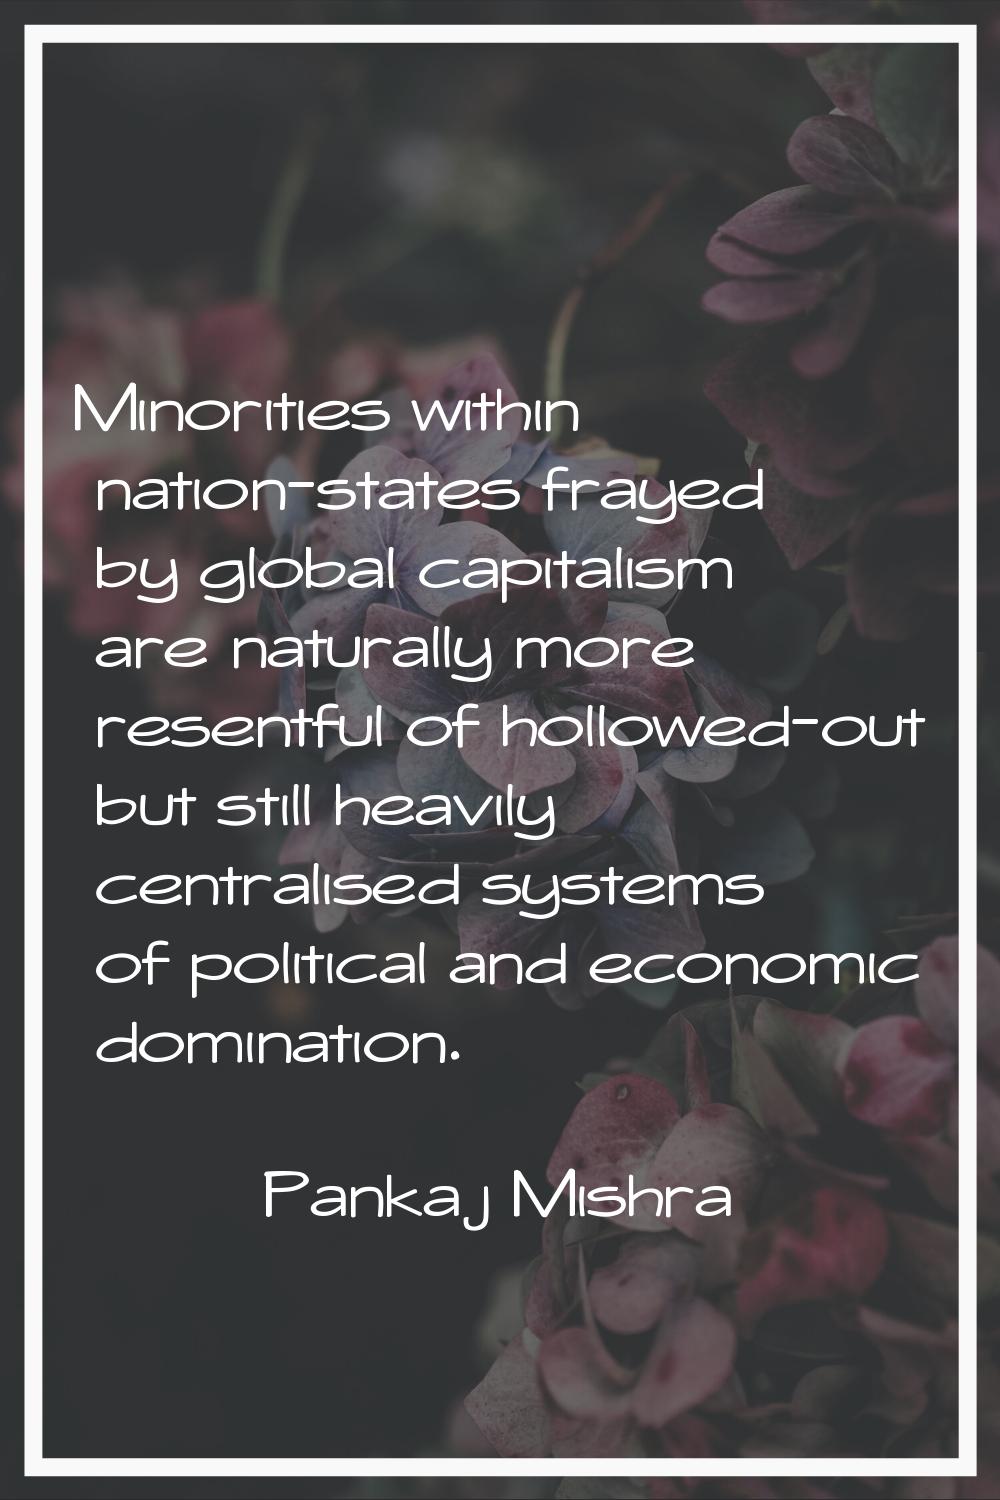 Minorities within nation-states frayed by global capitalism are naturally more resentful of hollowe